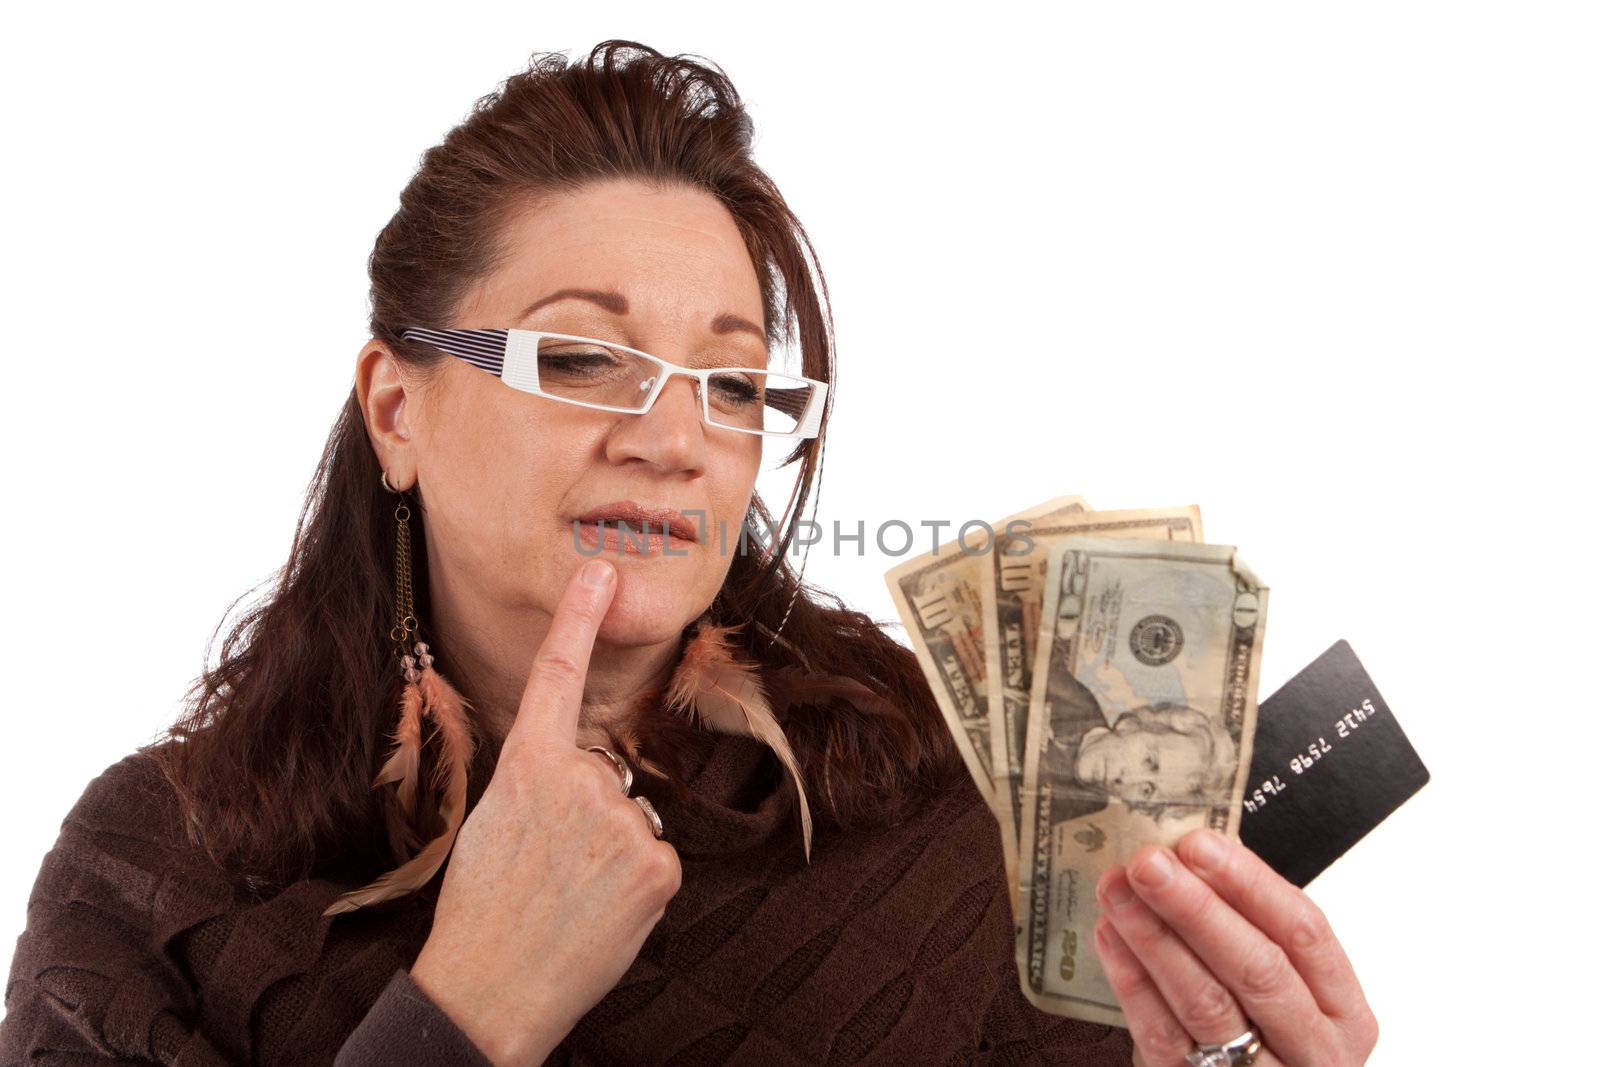 Middle aged woman carefully trying to decide between using old fashioned cash or a plastic credit card.